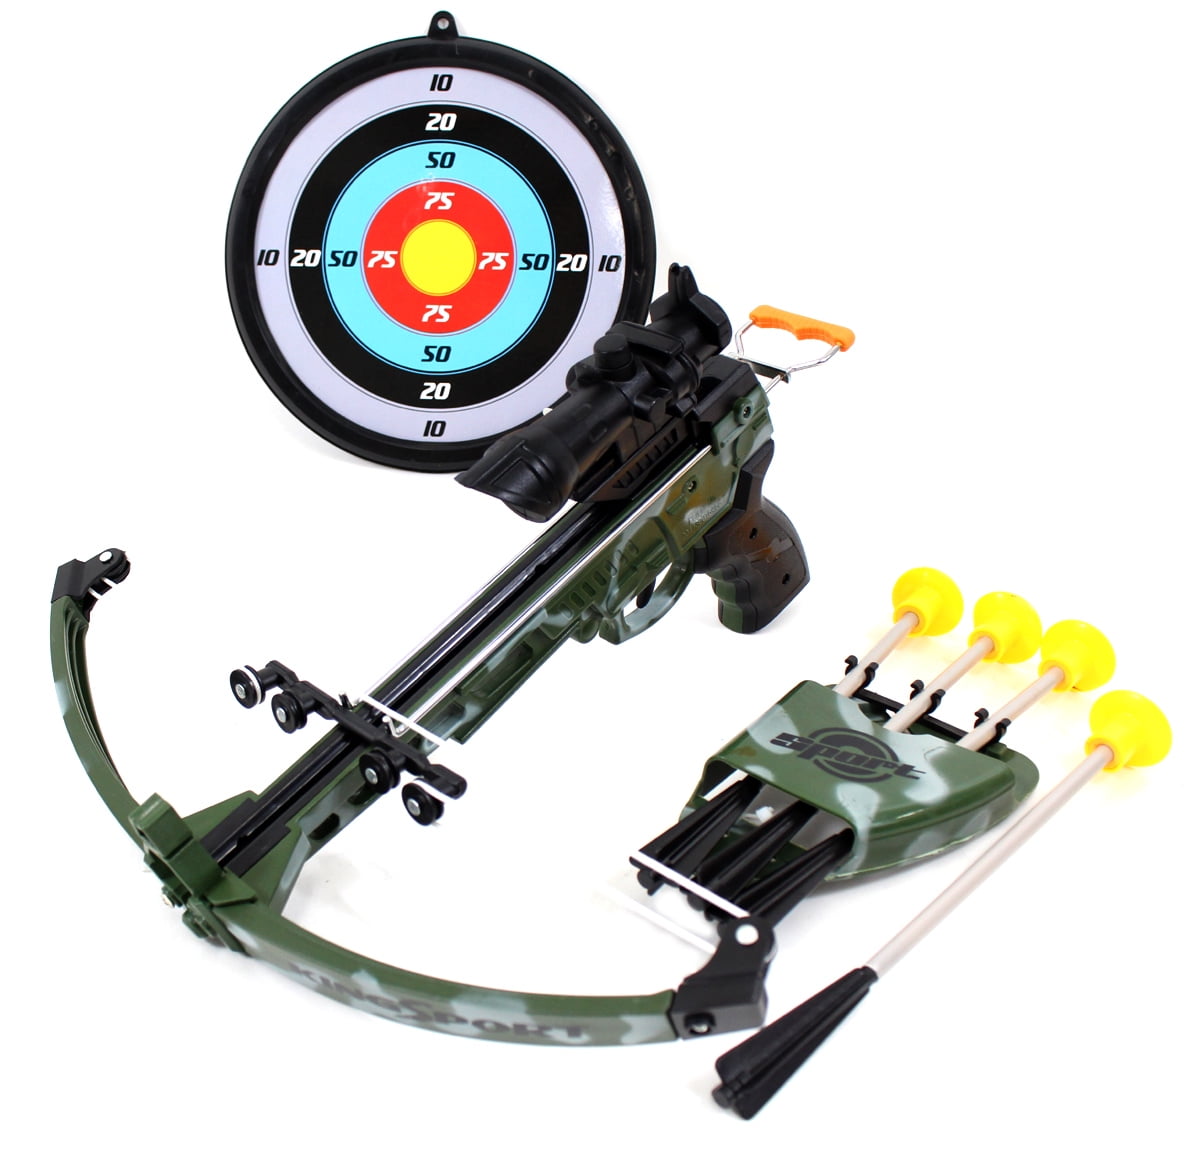 Target Archery Target Practice Toy for Teens NXT Generation Orange Blaze Tactical Crossbow and 3 Foam Suction Cup Projectiles